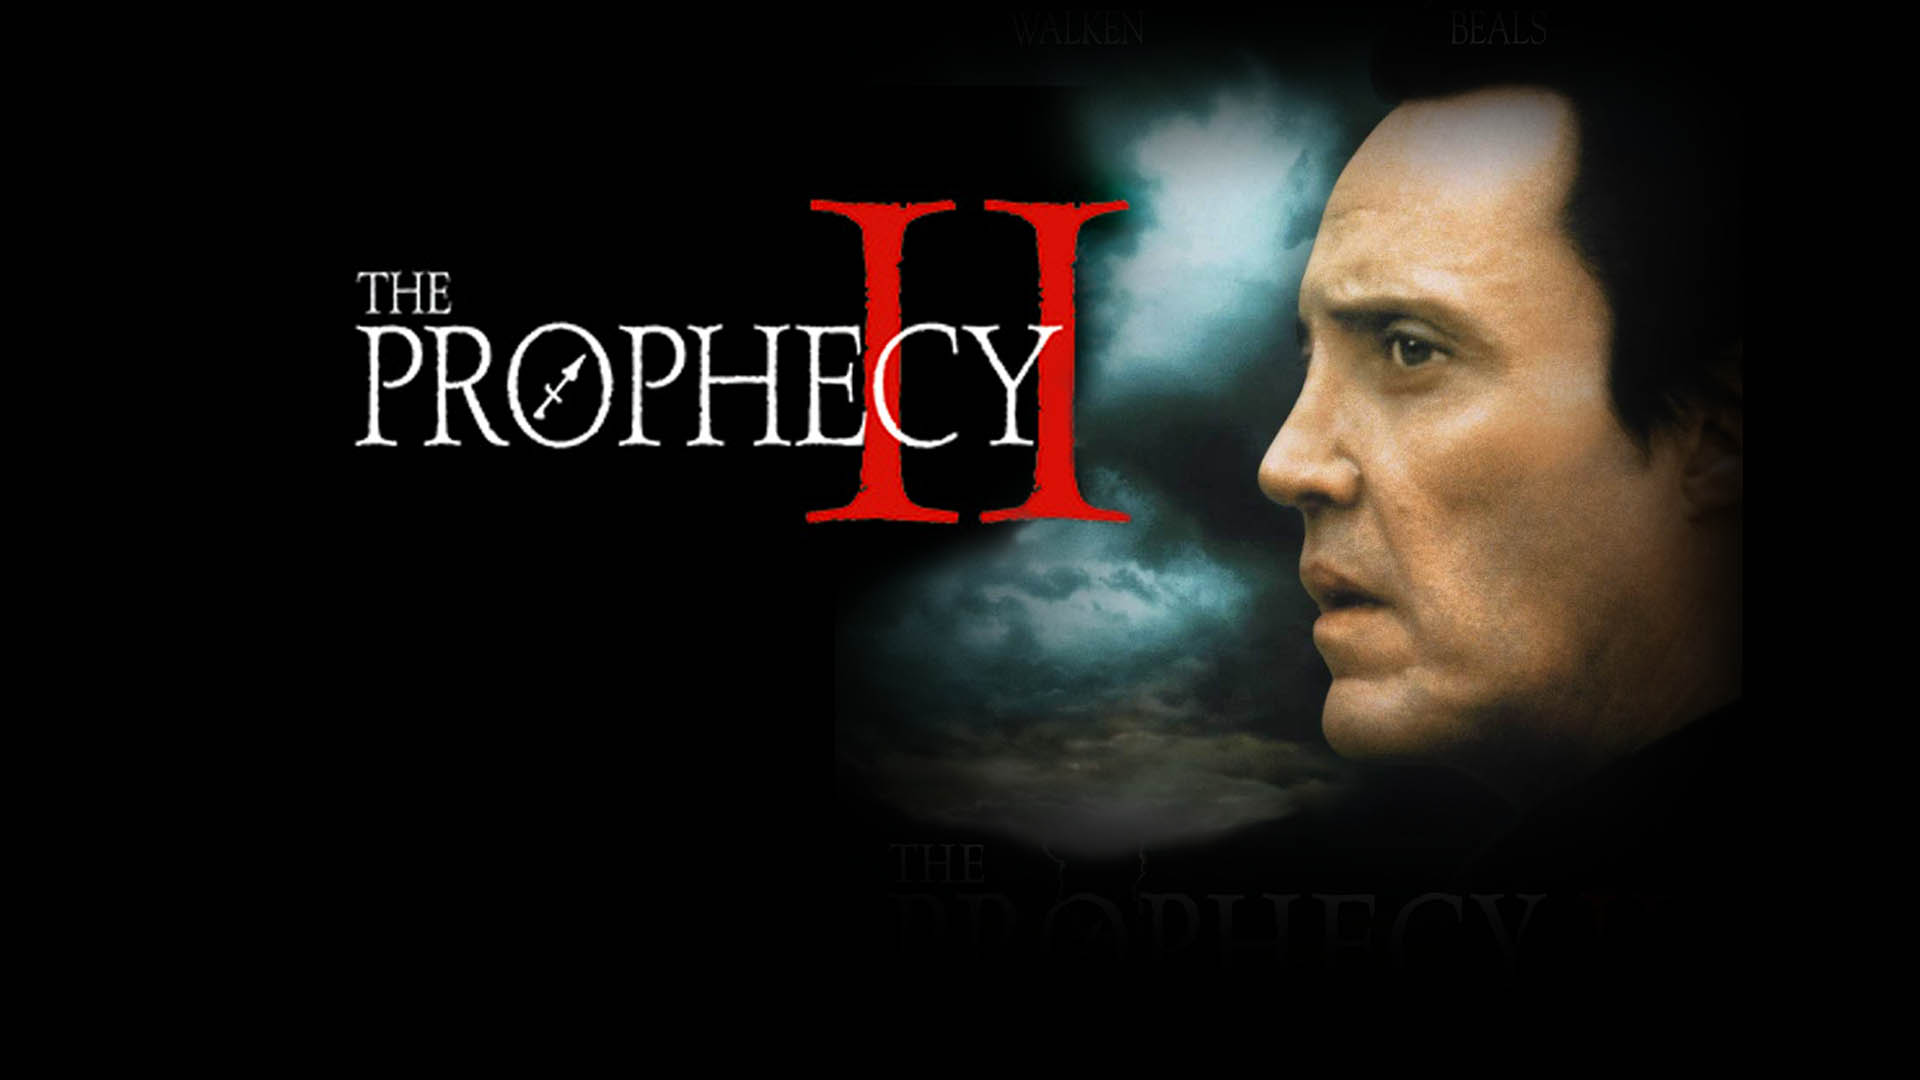 Watch The Prophecy II Online | Stream Full Movies